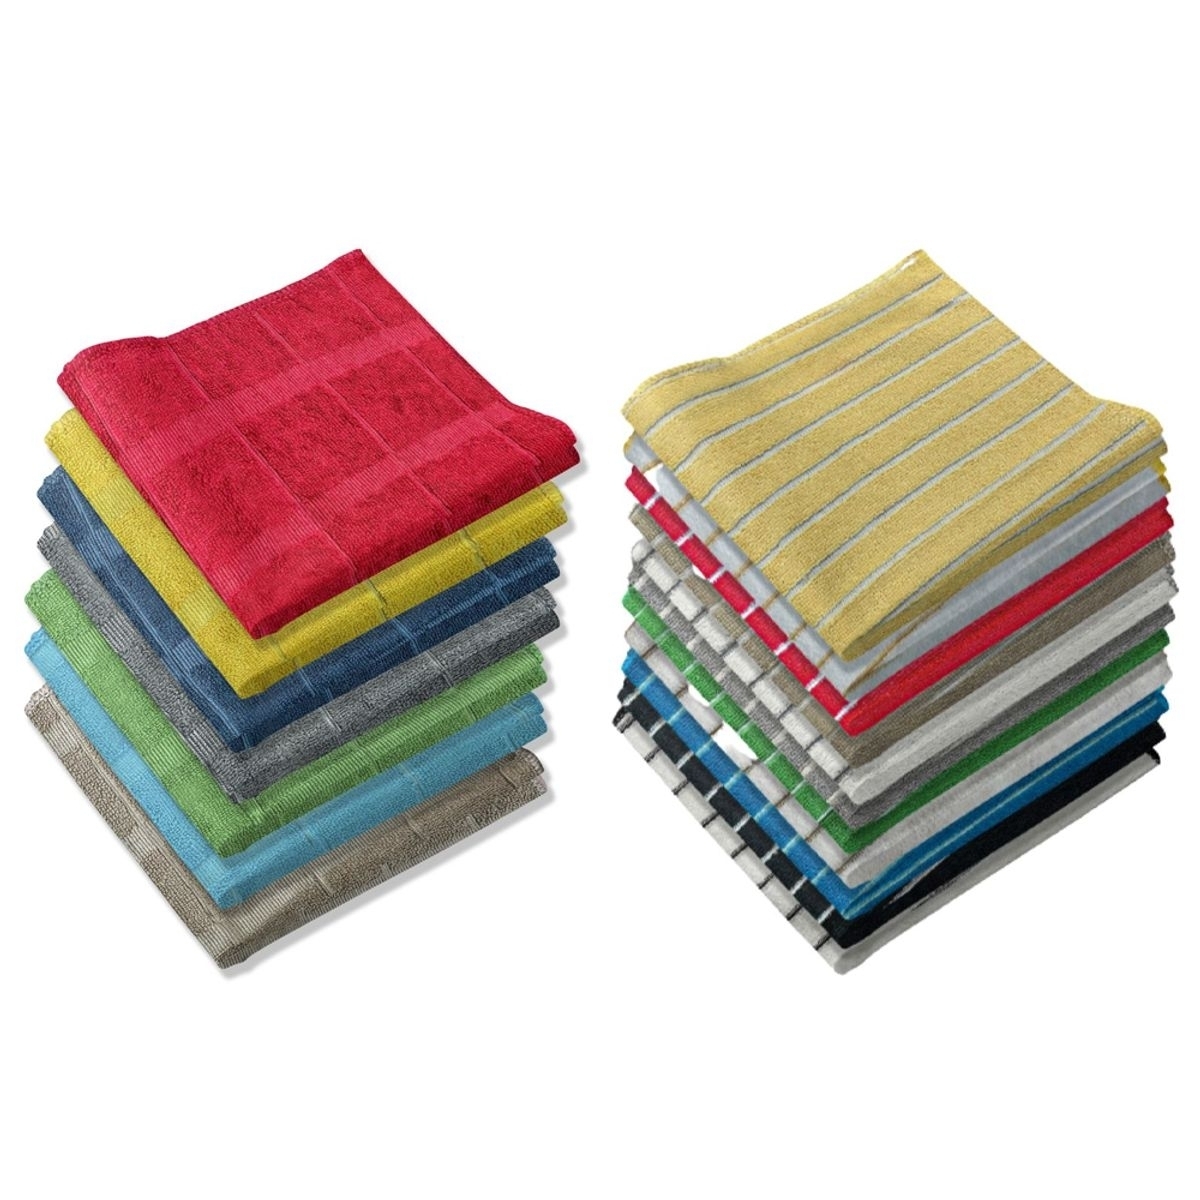 10-Pack: Ultra-Absorbent Multi Use Cleaning Super Soft Microfiber Dish Utility Rag Cloths - Striped